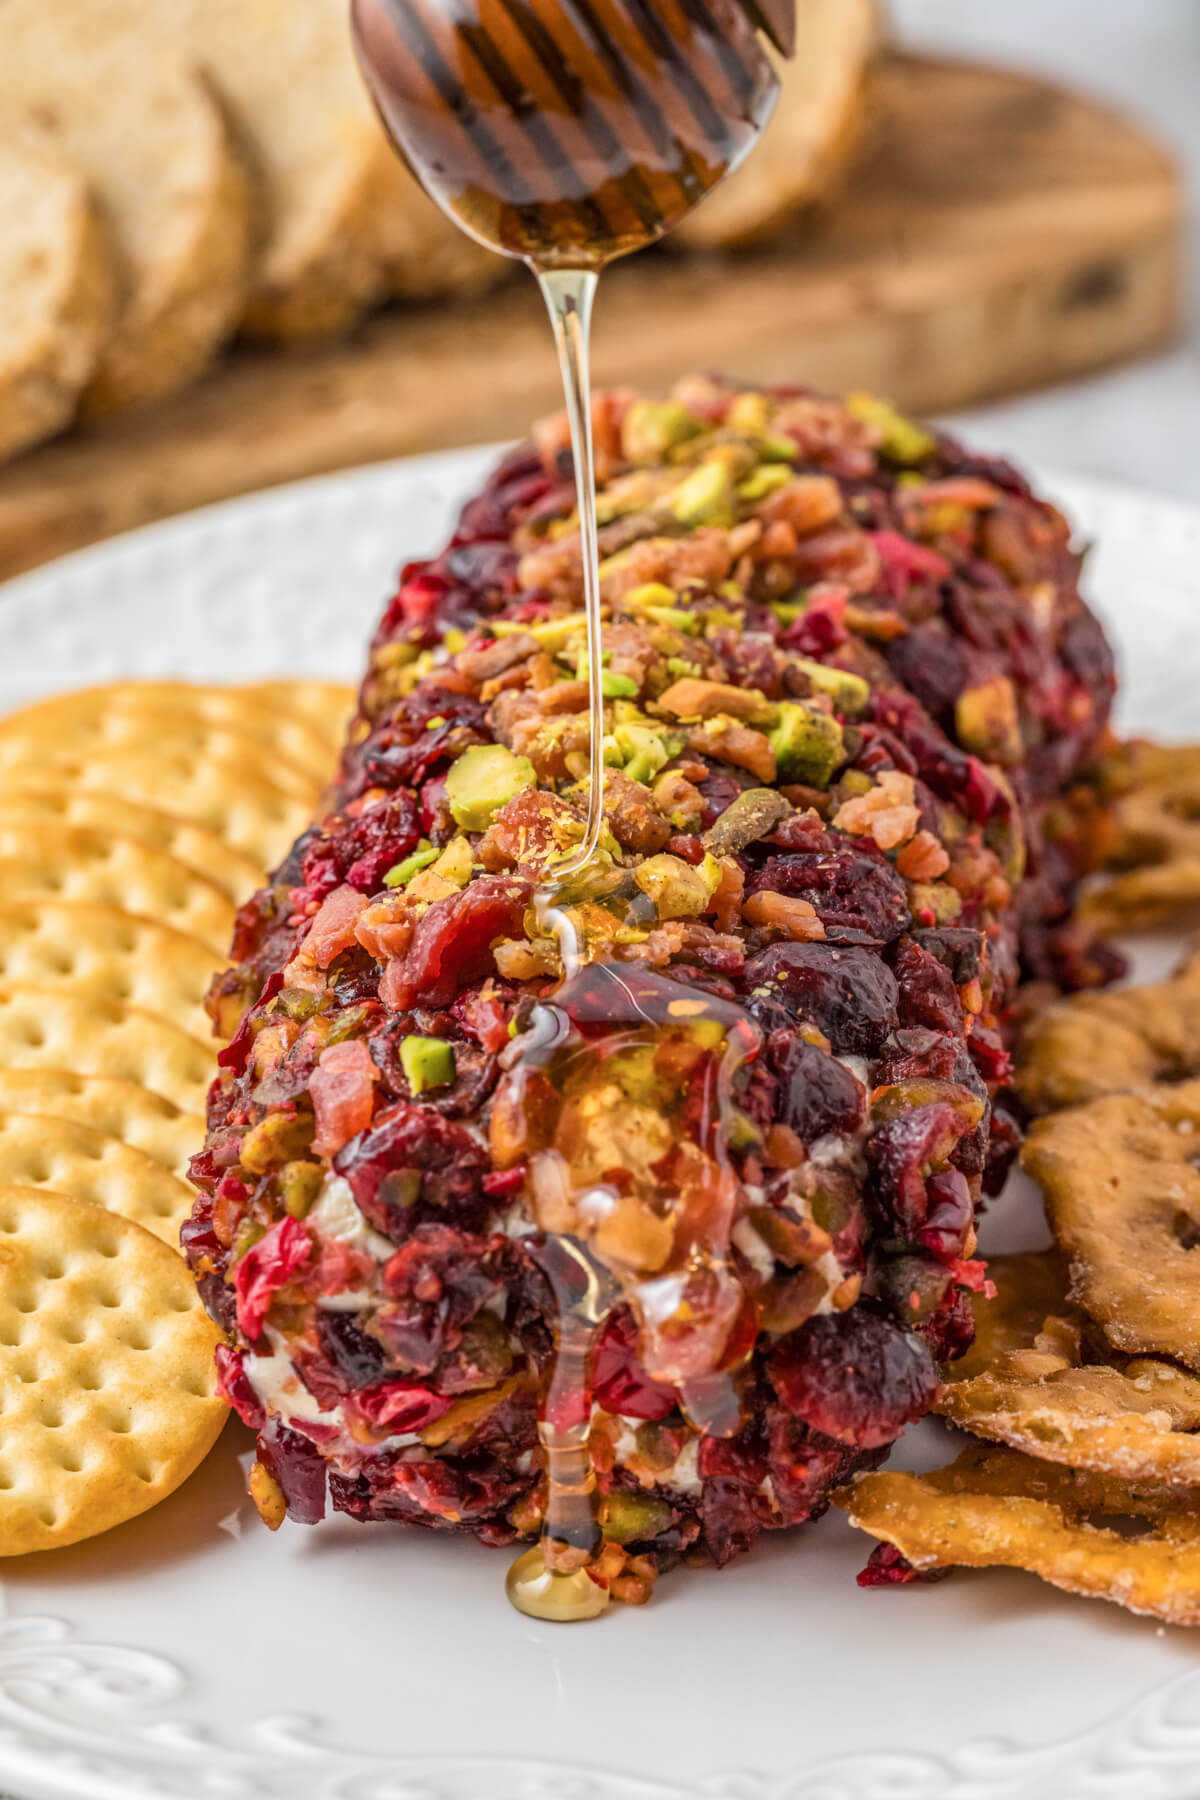 A whole pistachio and cranberry cheese log on a white plate surrounded by crackers being drizzled with golden honey.